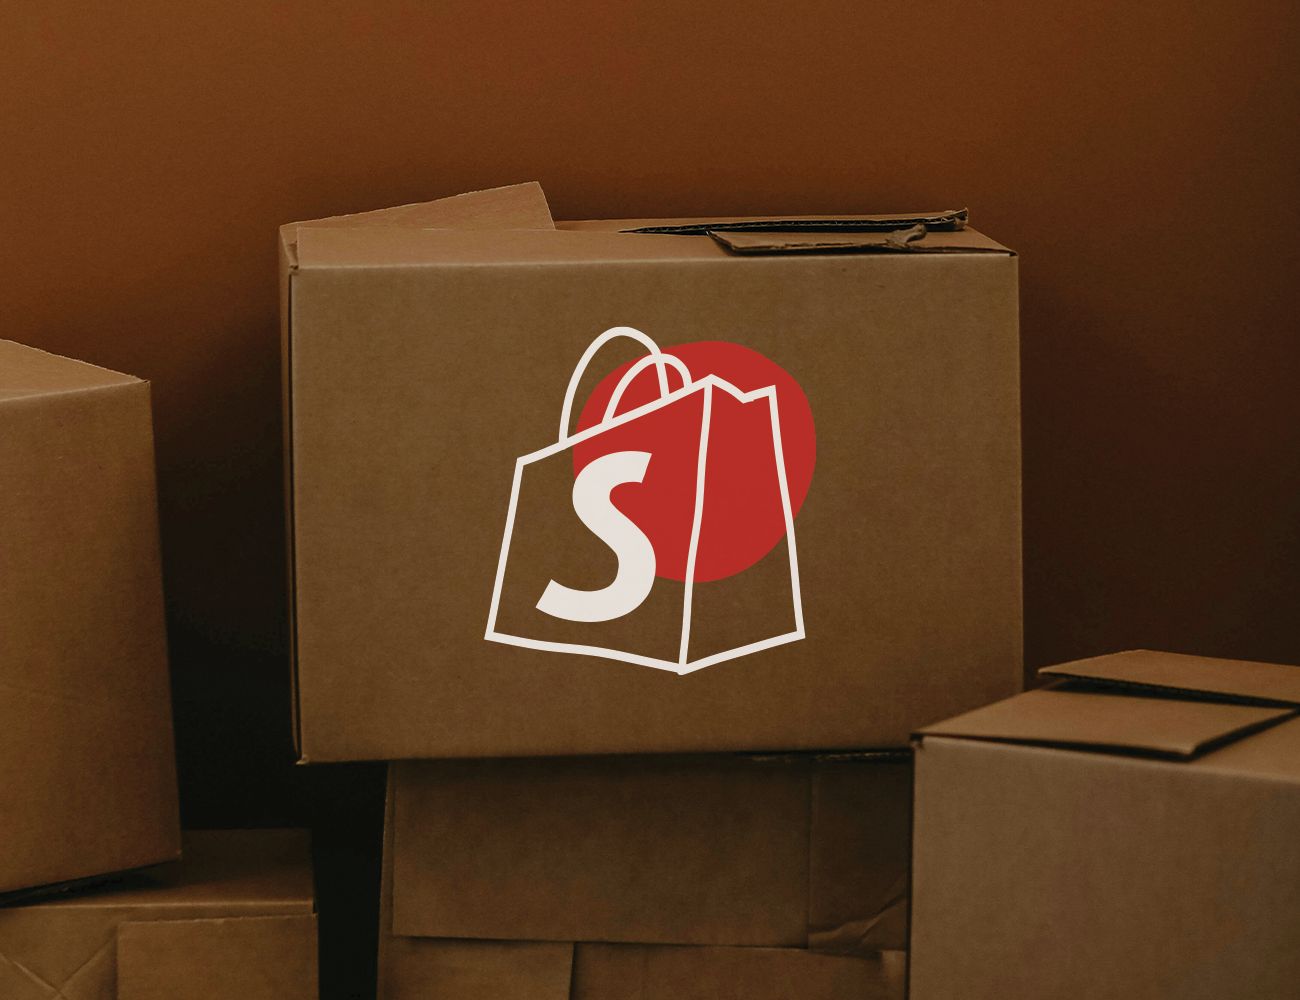 Moving boxes with Shopify logo